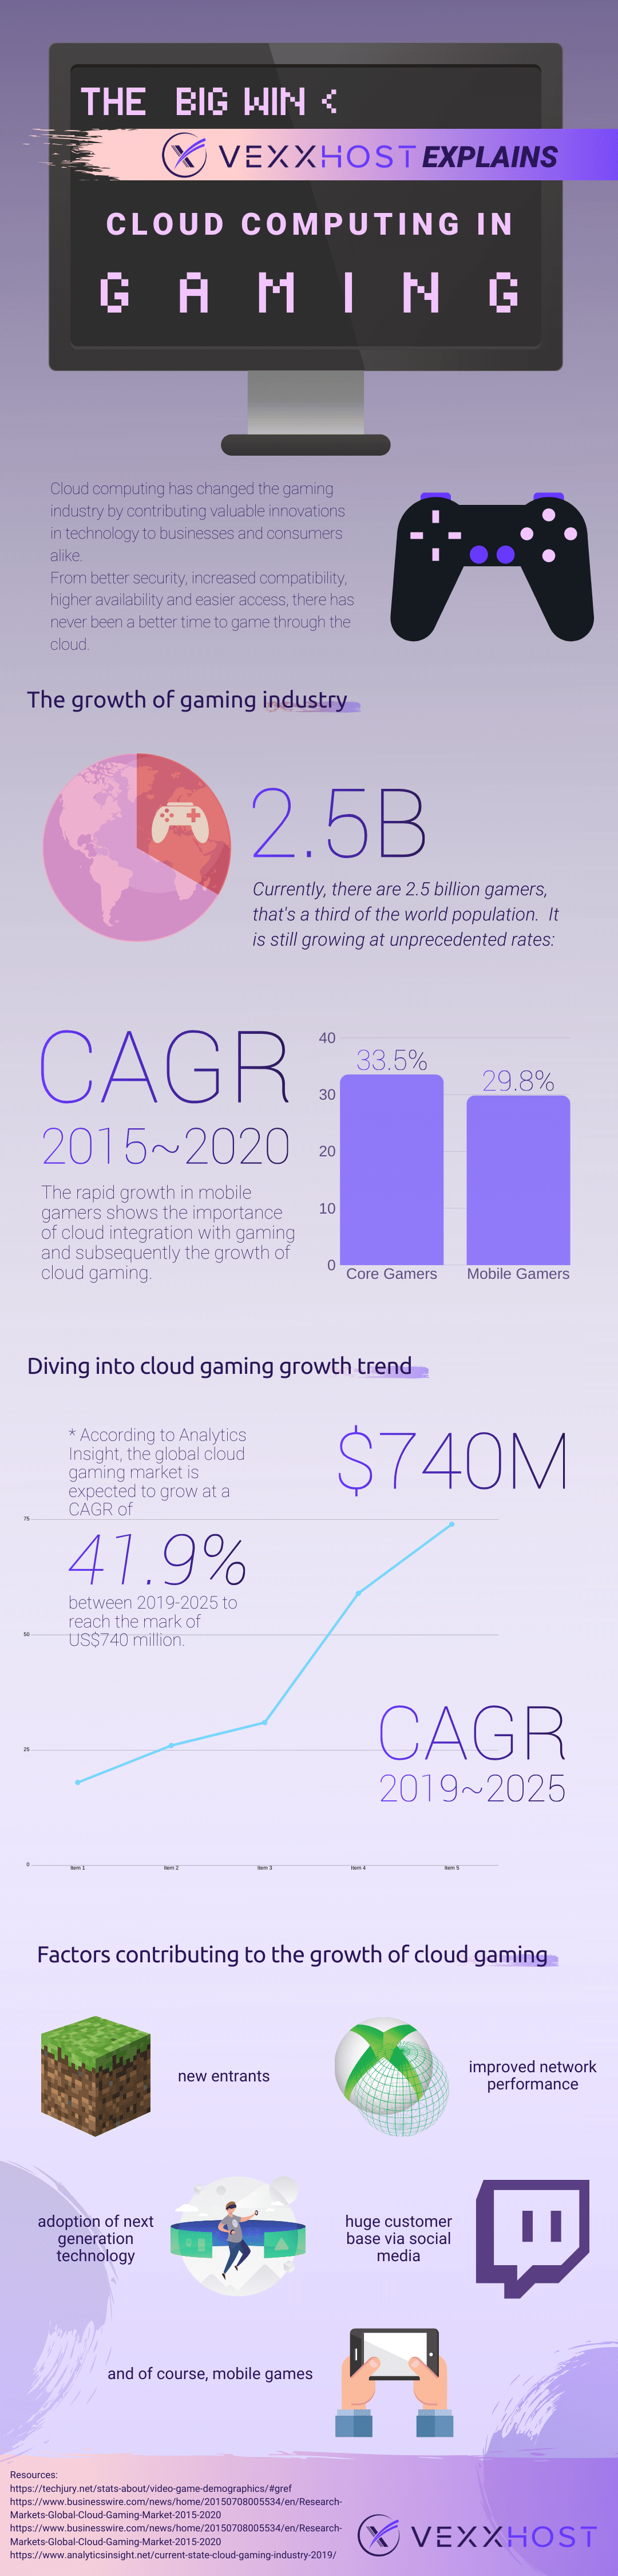 Cloud Computing in the Gaming Industry